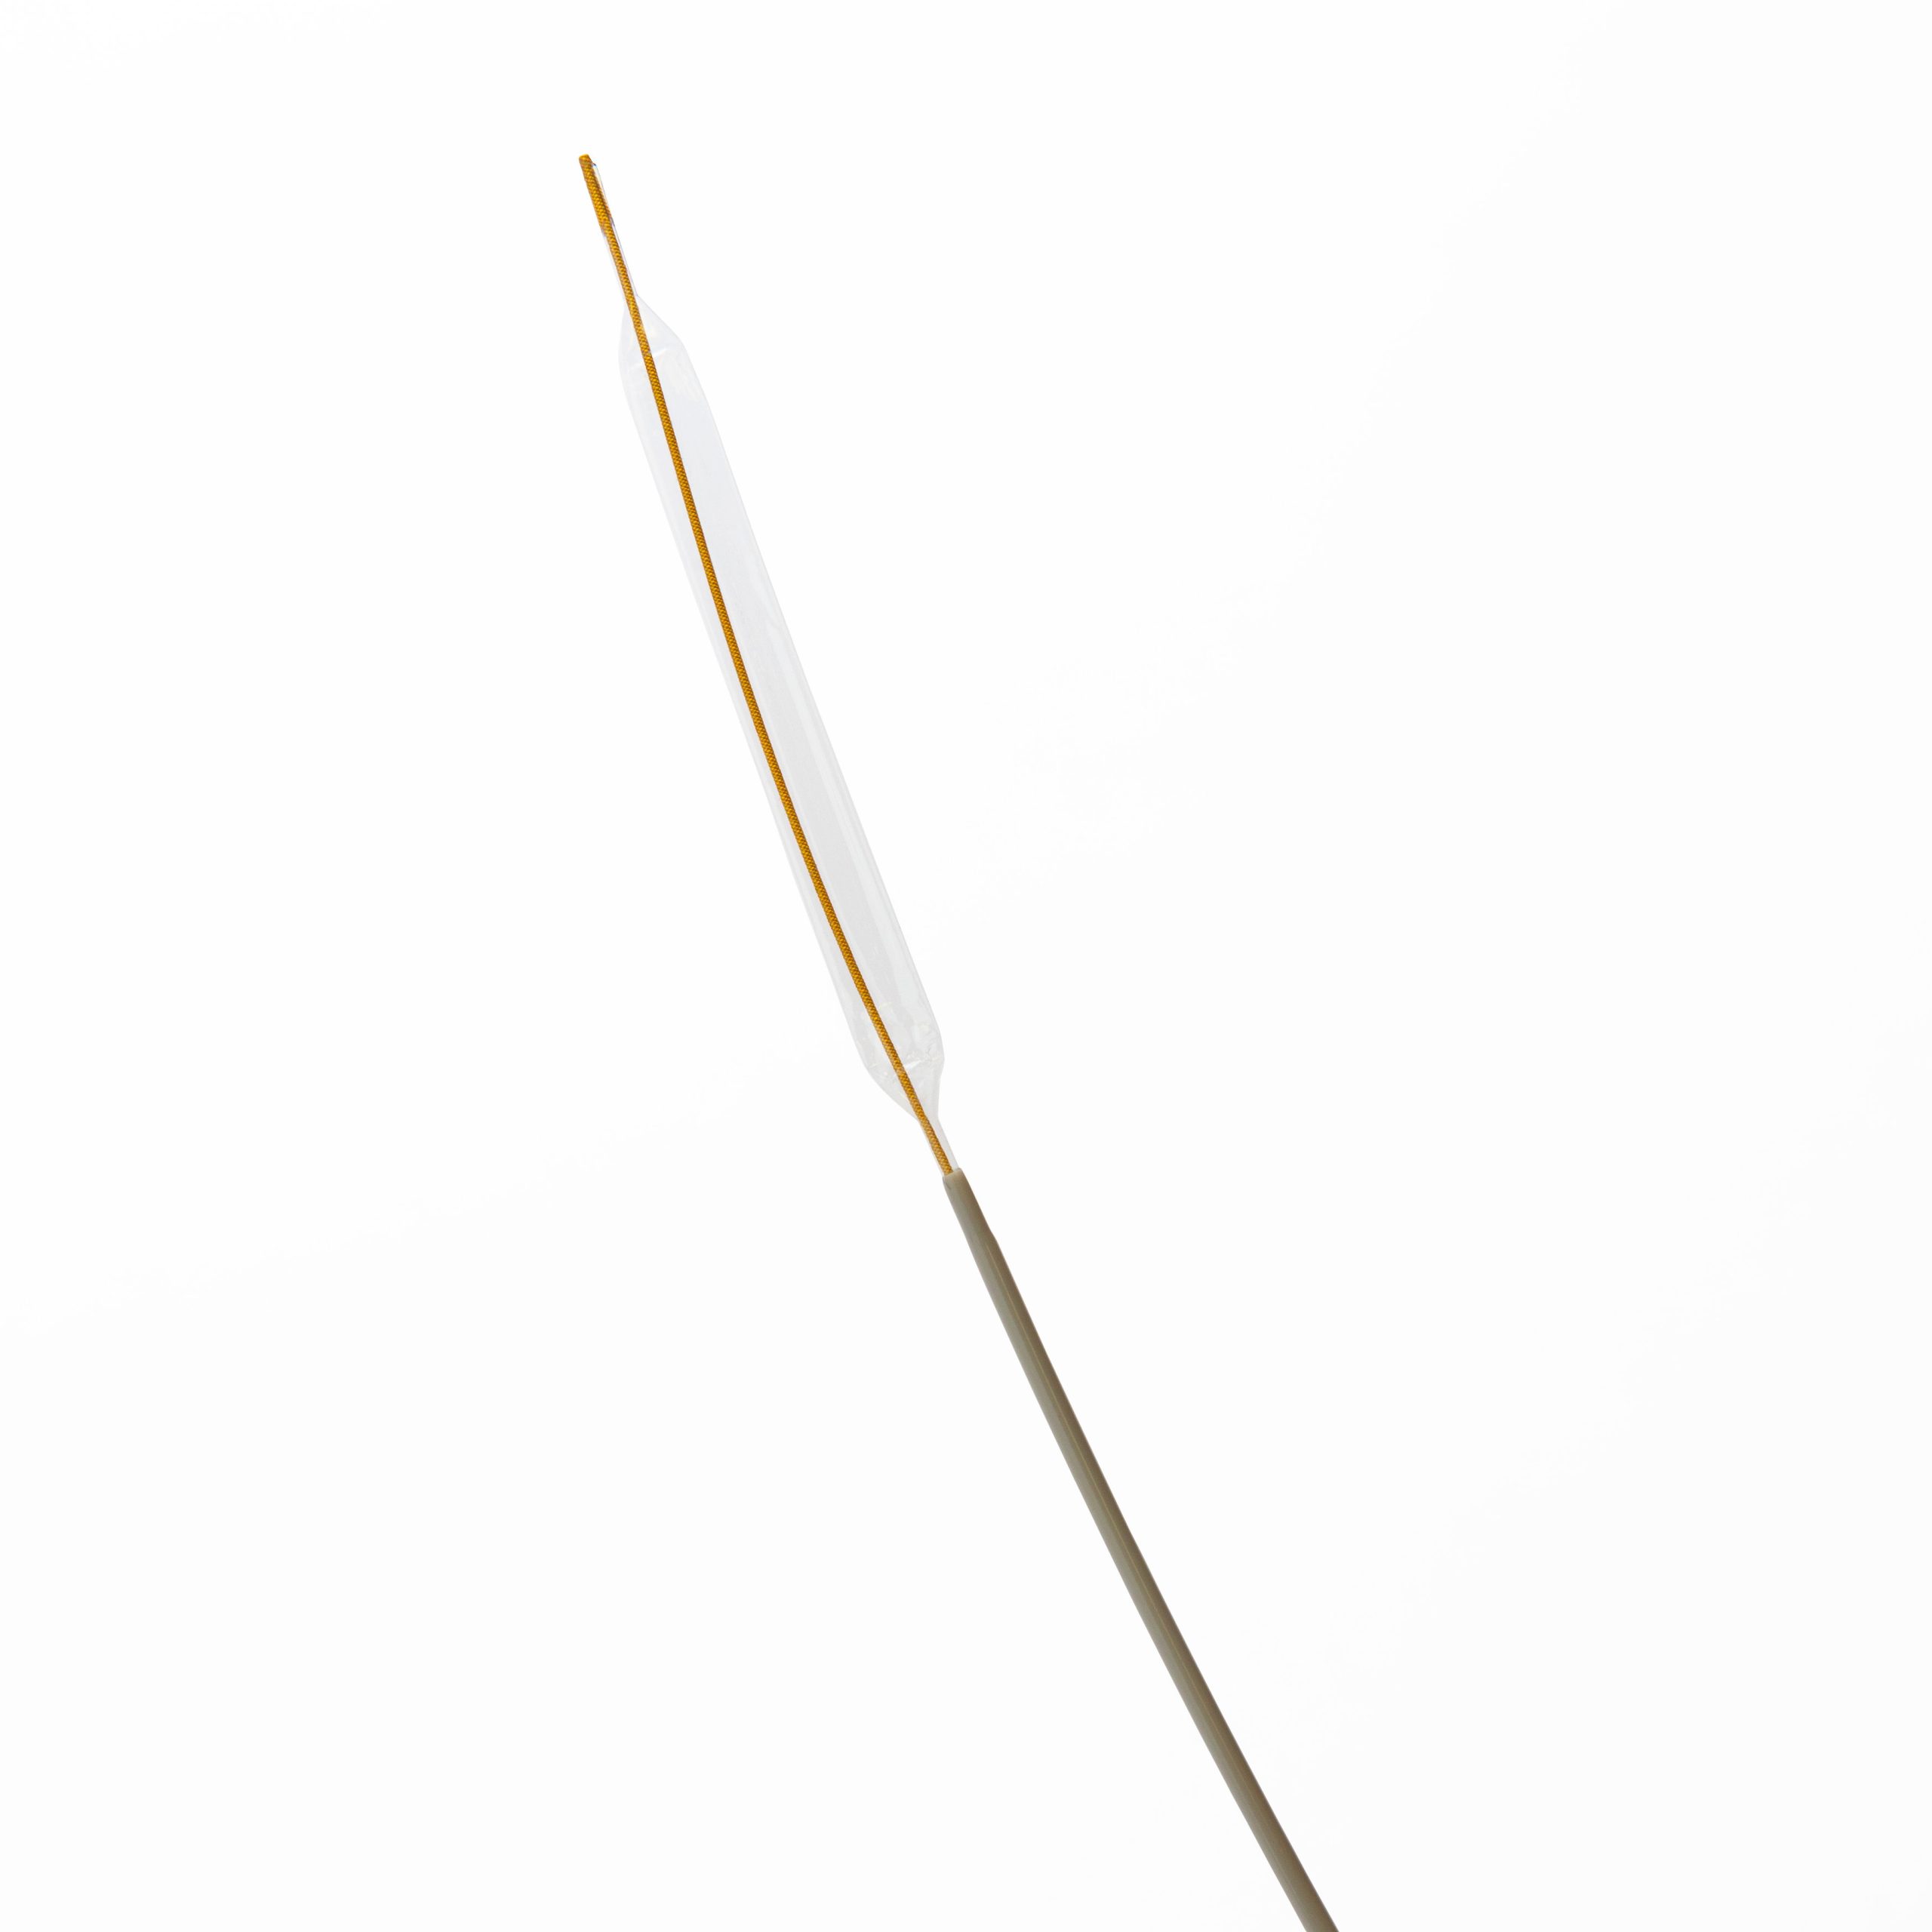 Catheter component used in a medical device - Nextern